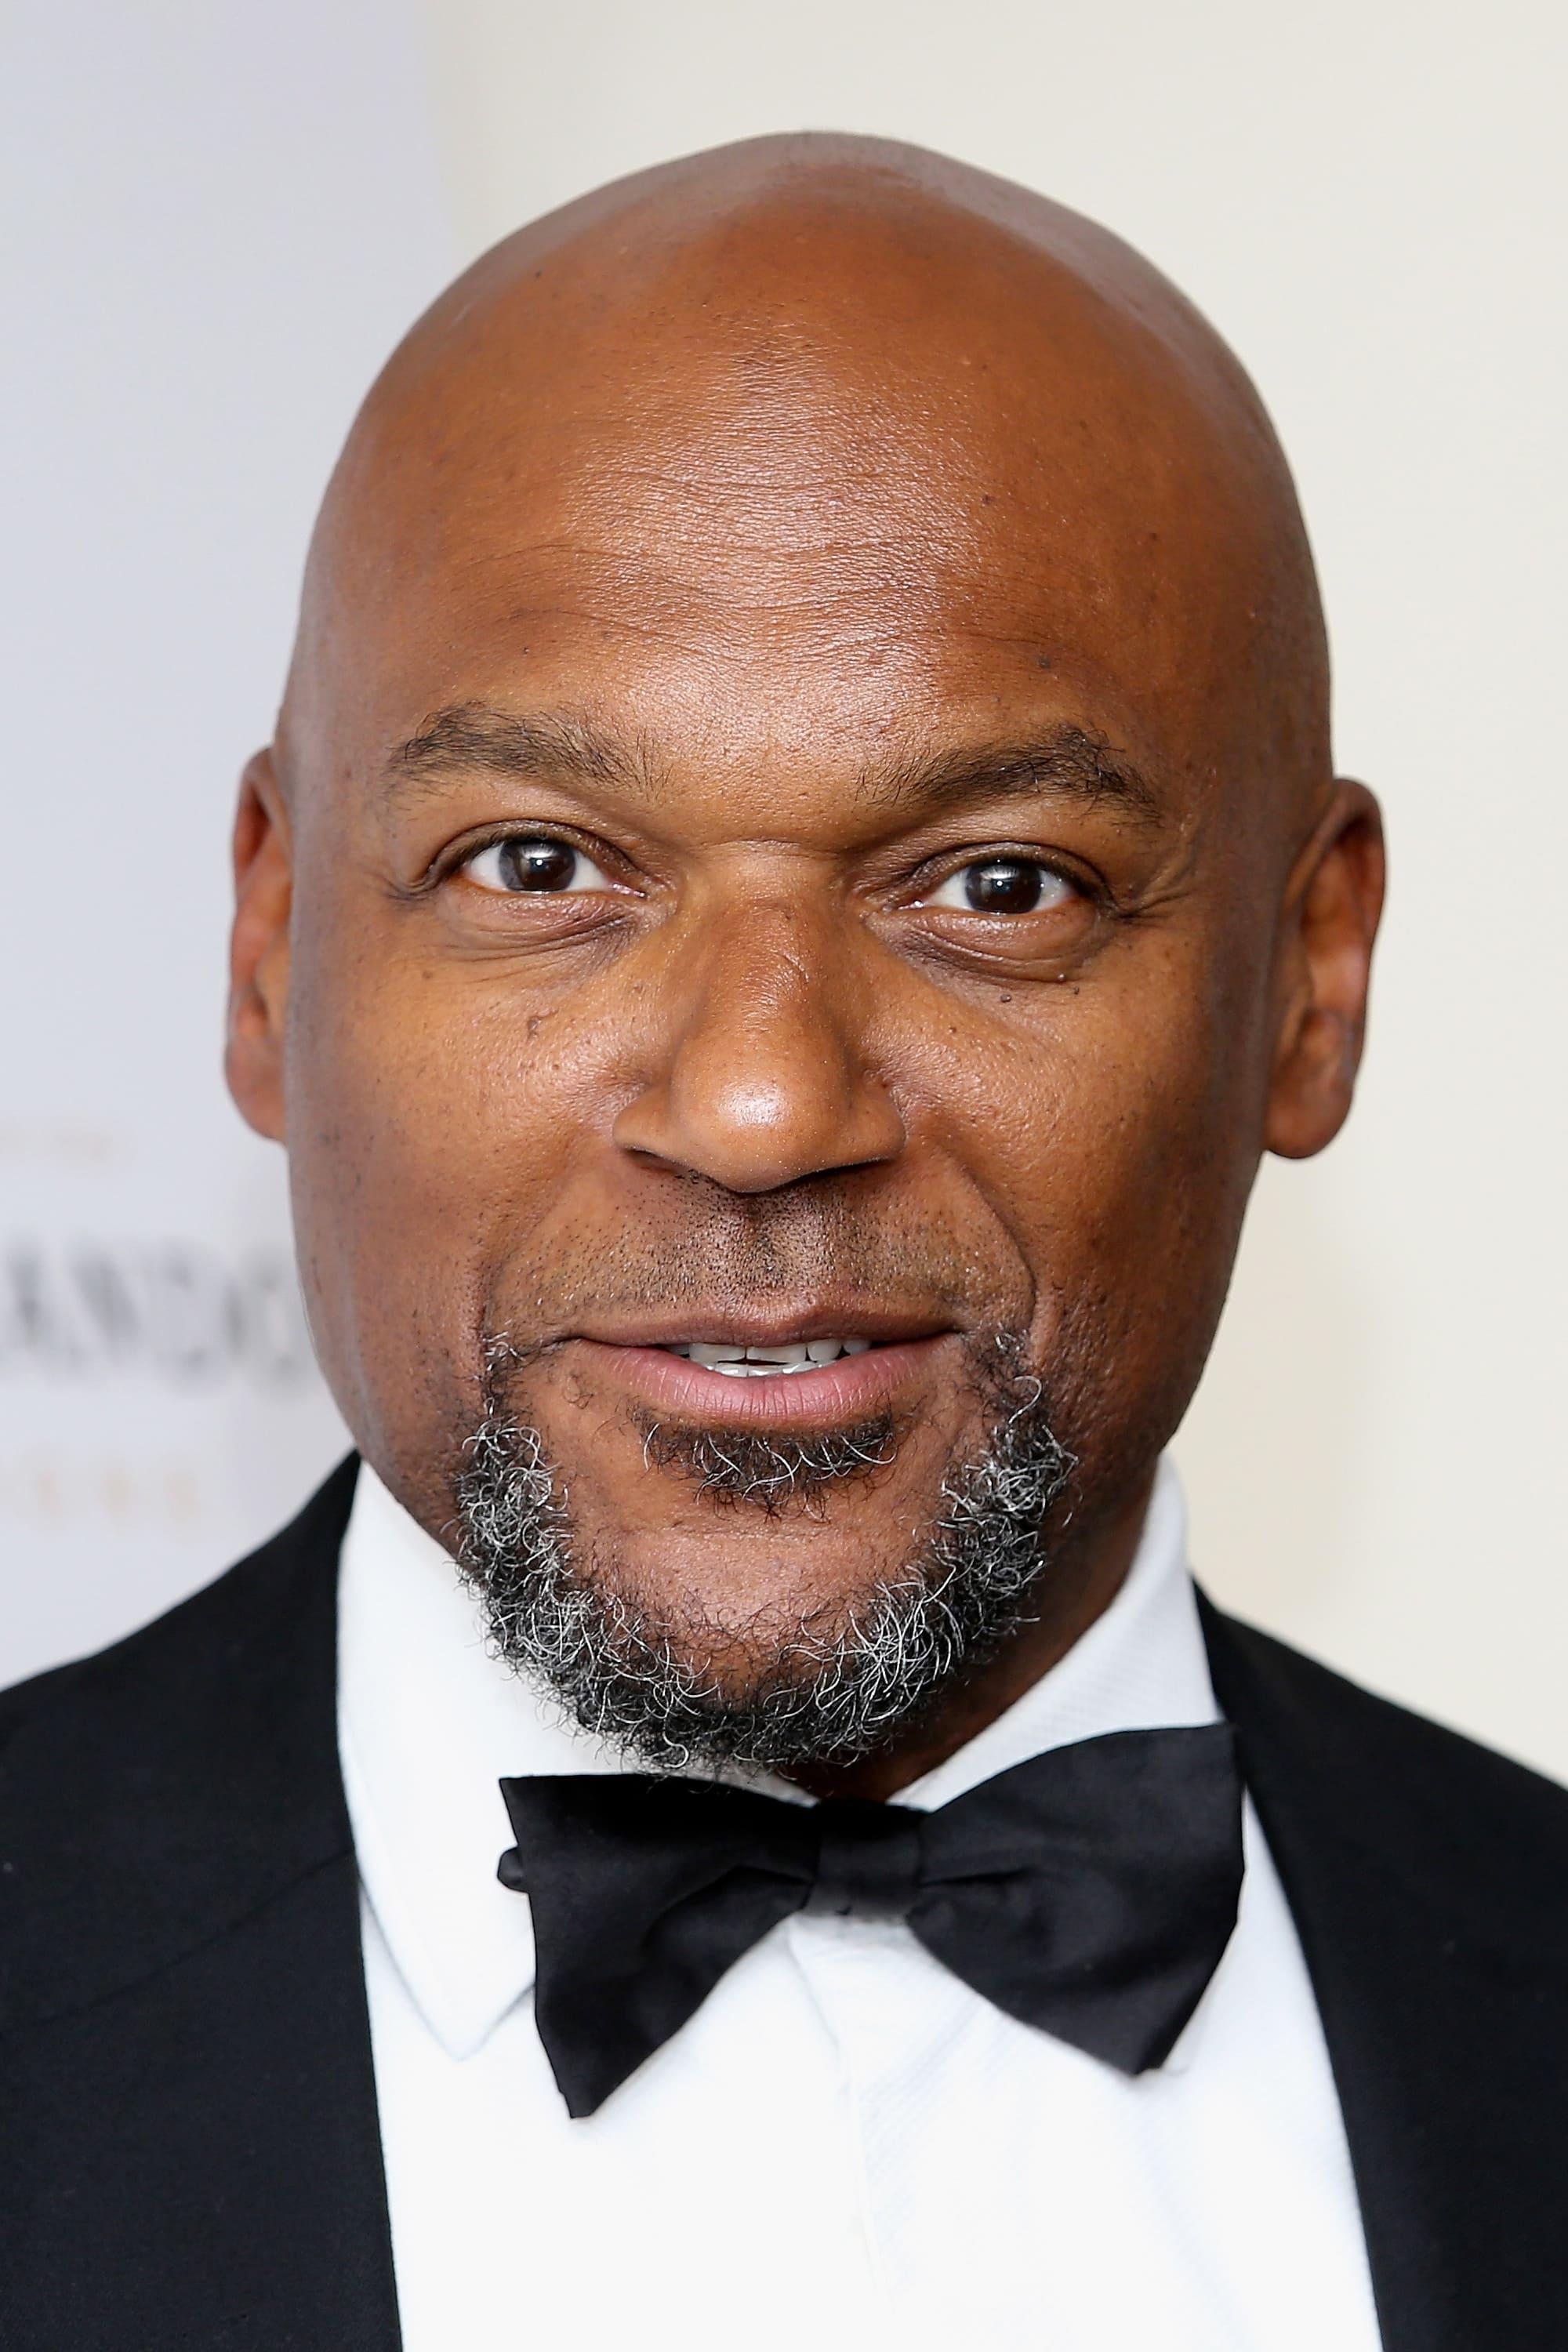 Colin Salmon | James "One" Shade